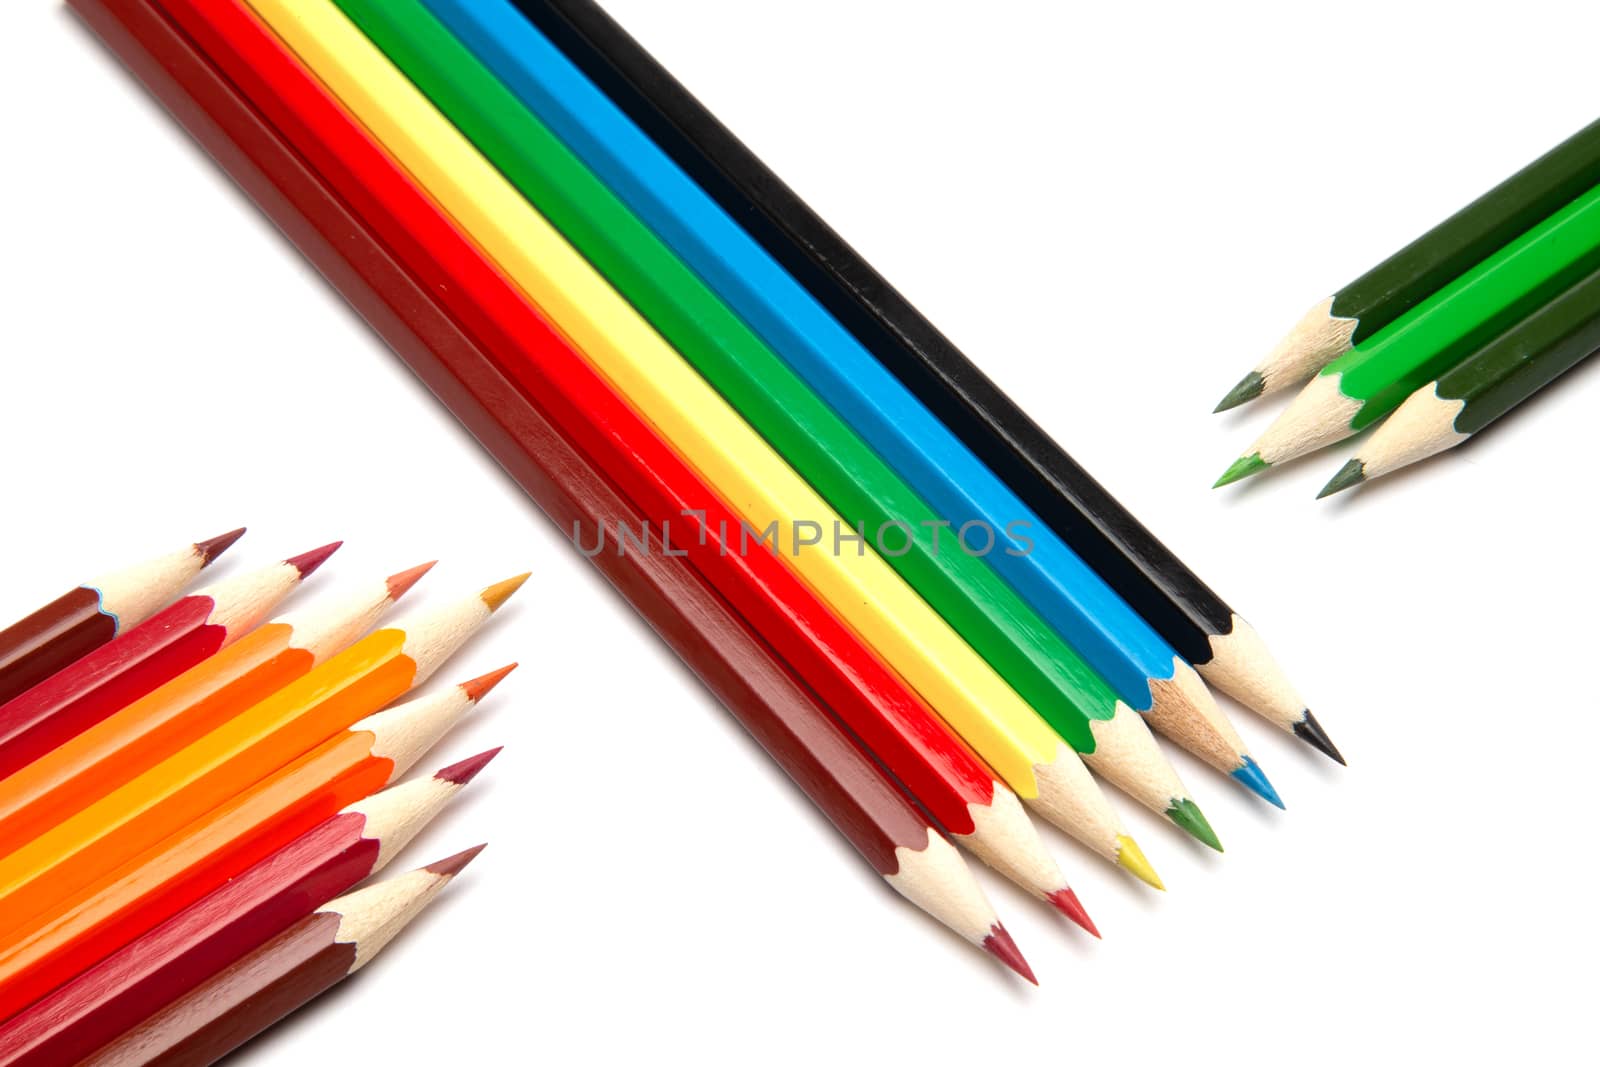 Lot of colorful wooden pencils on a white background